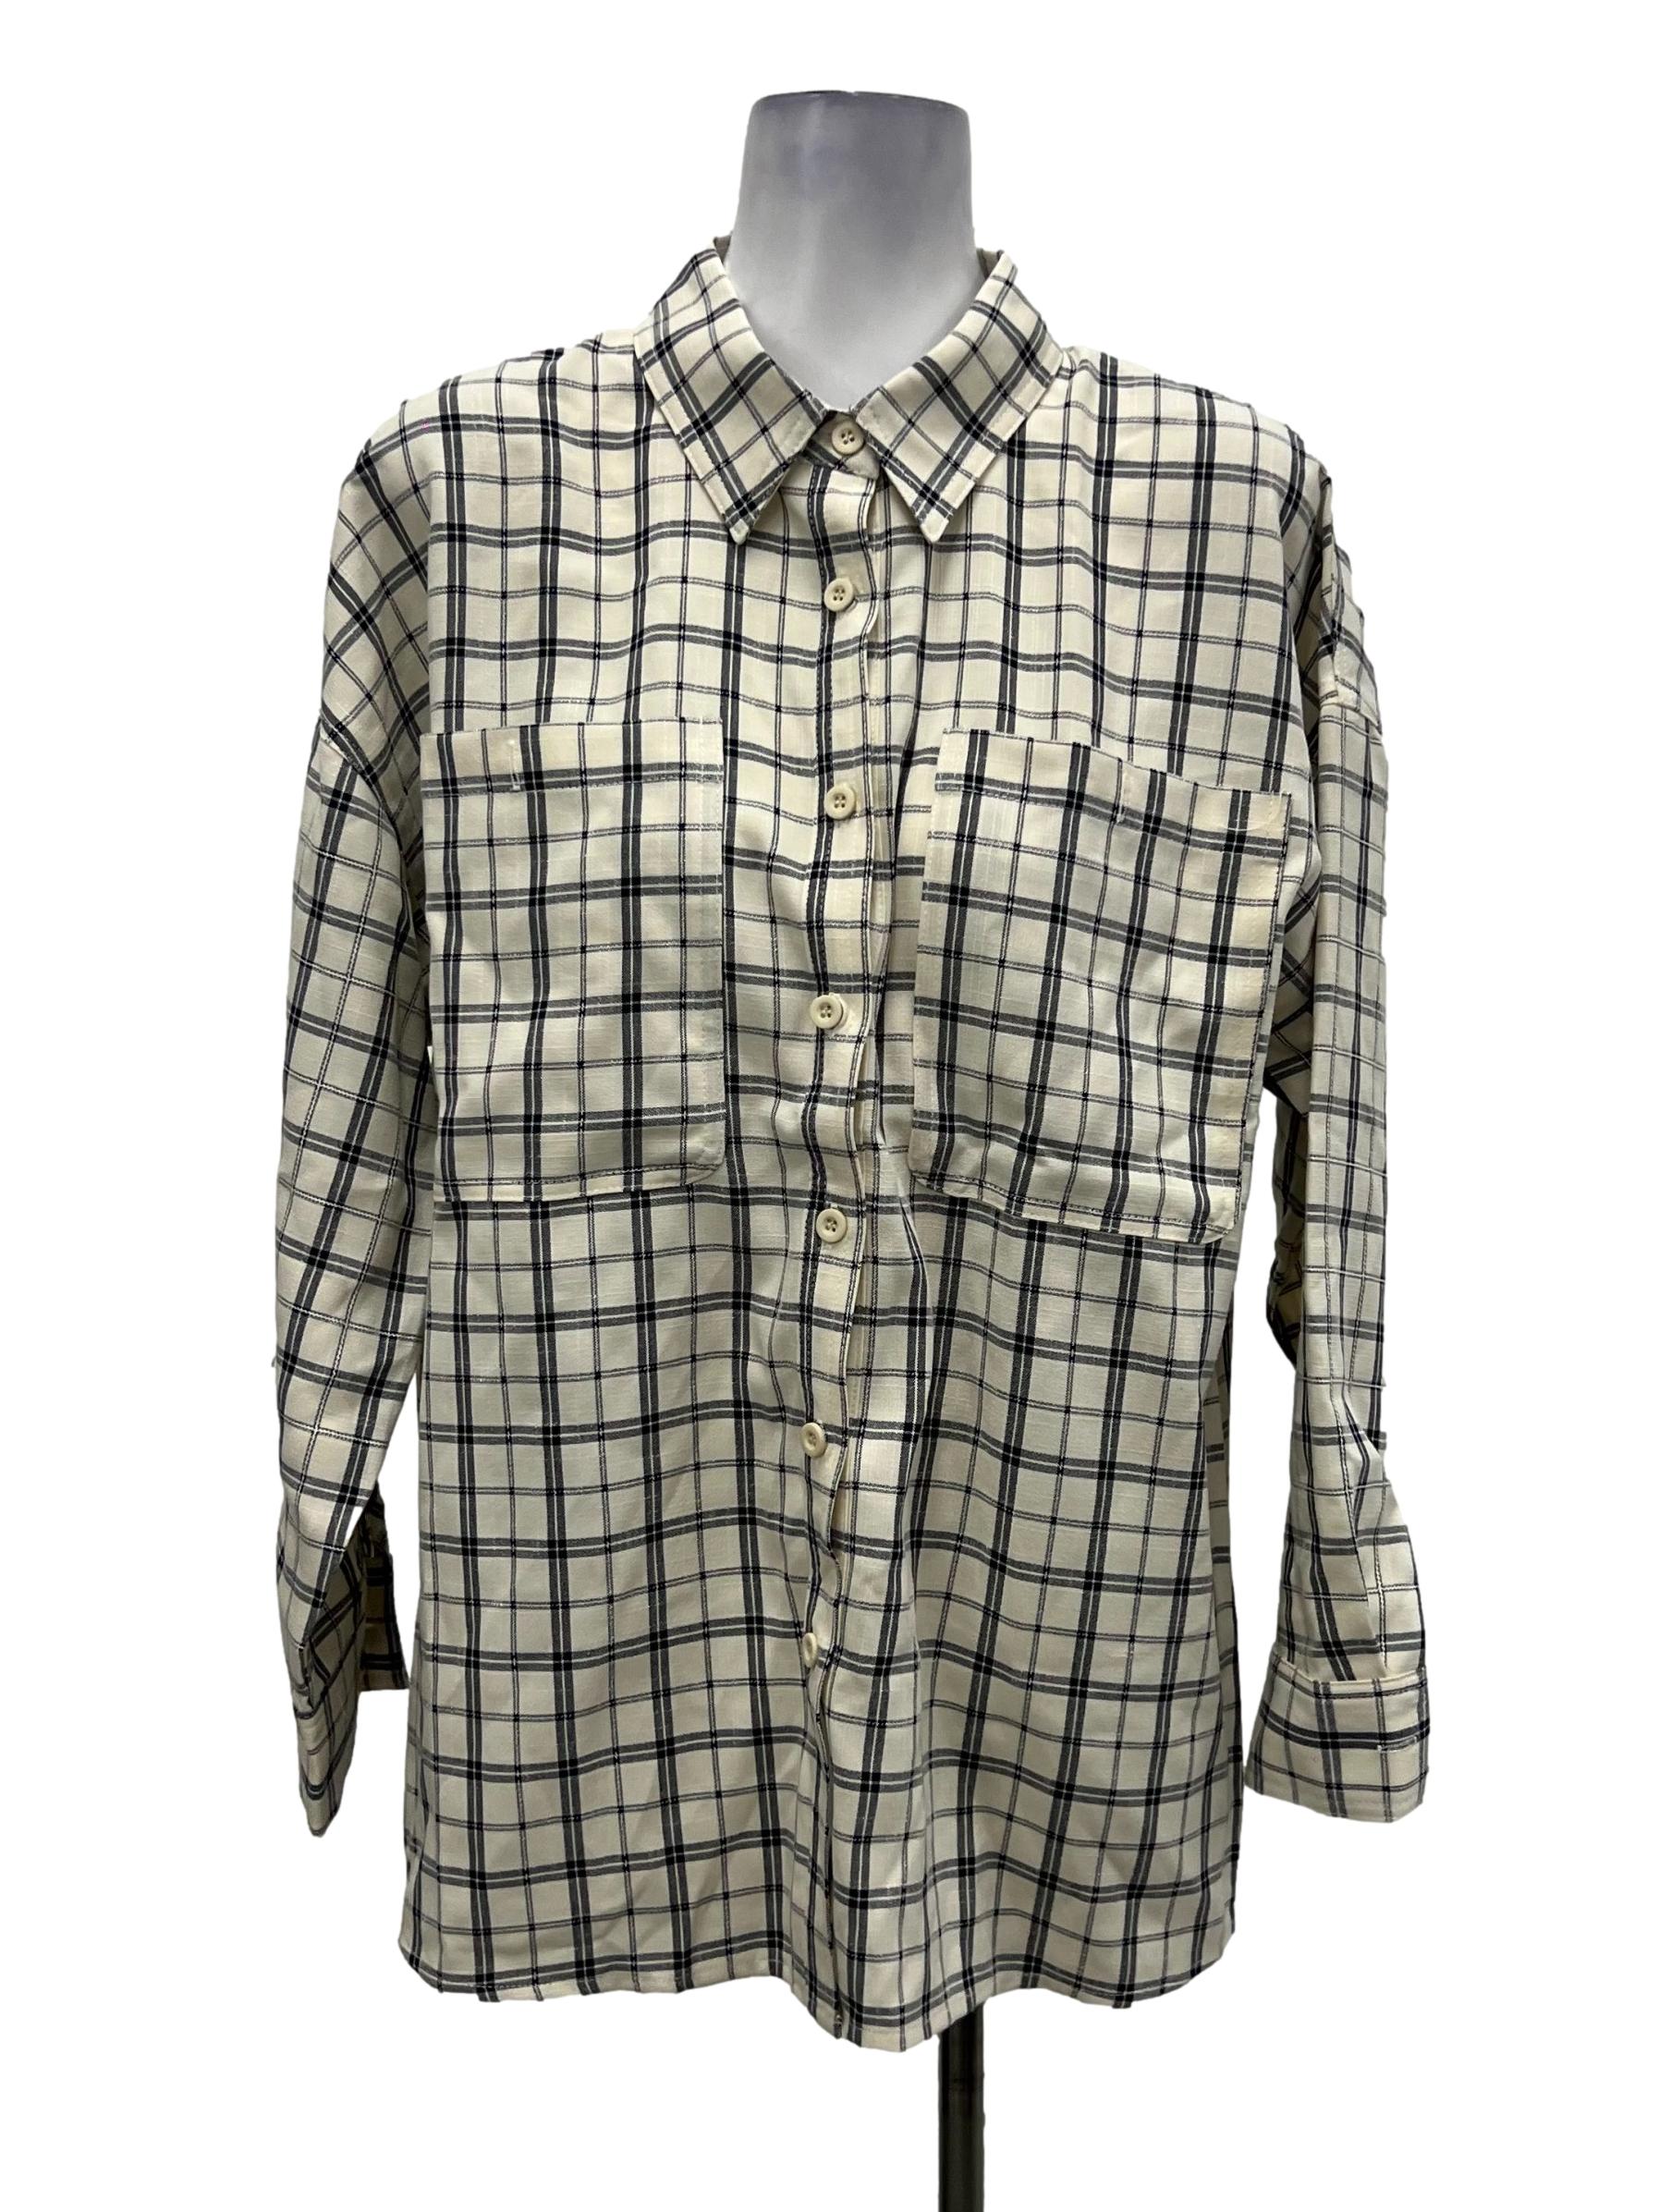 Cream And Black Plaid Button Up Collared Blouse